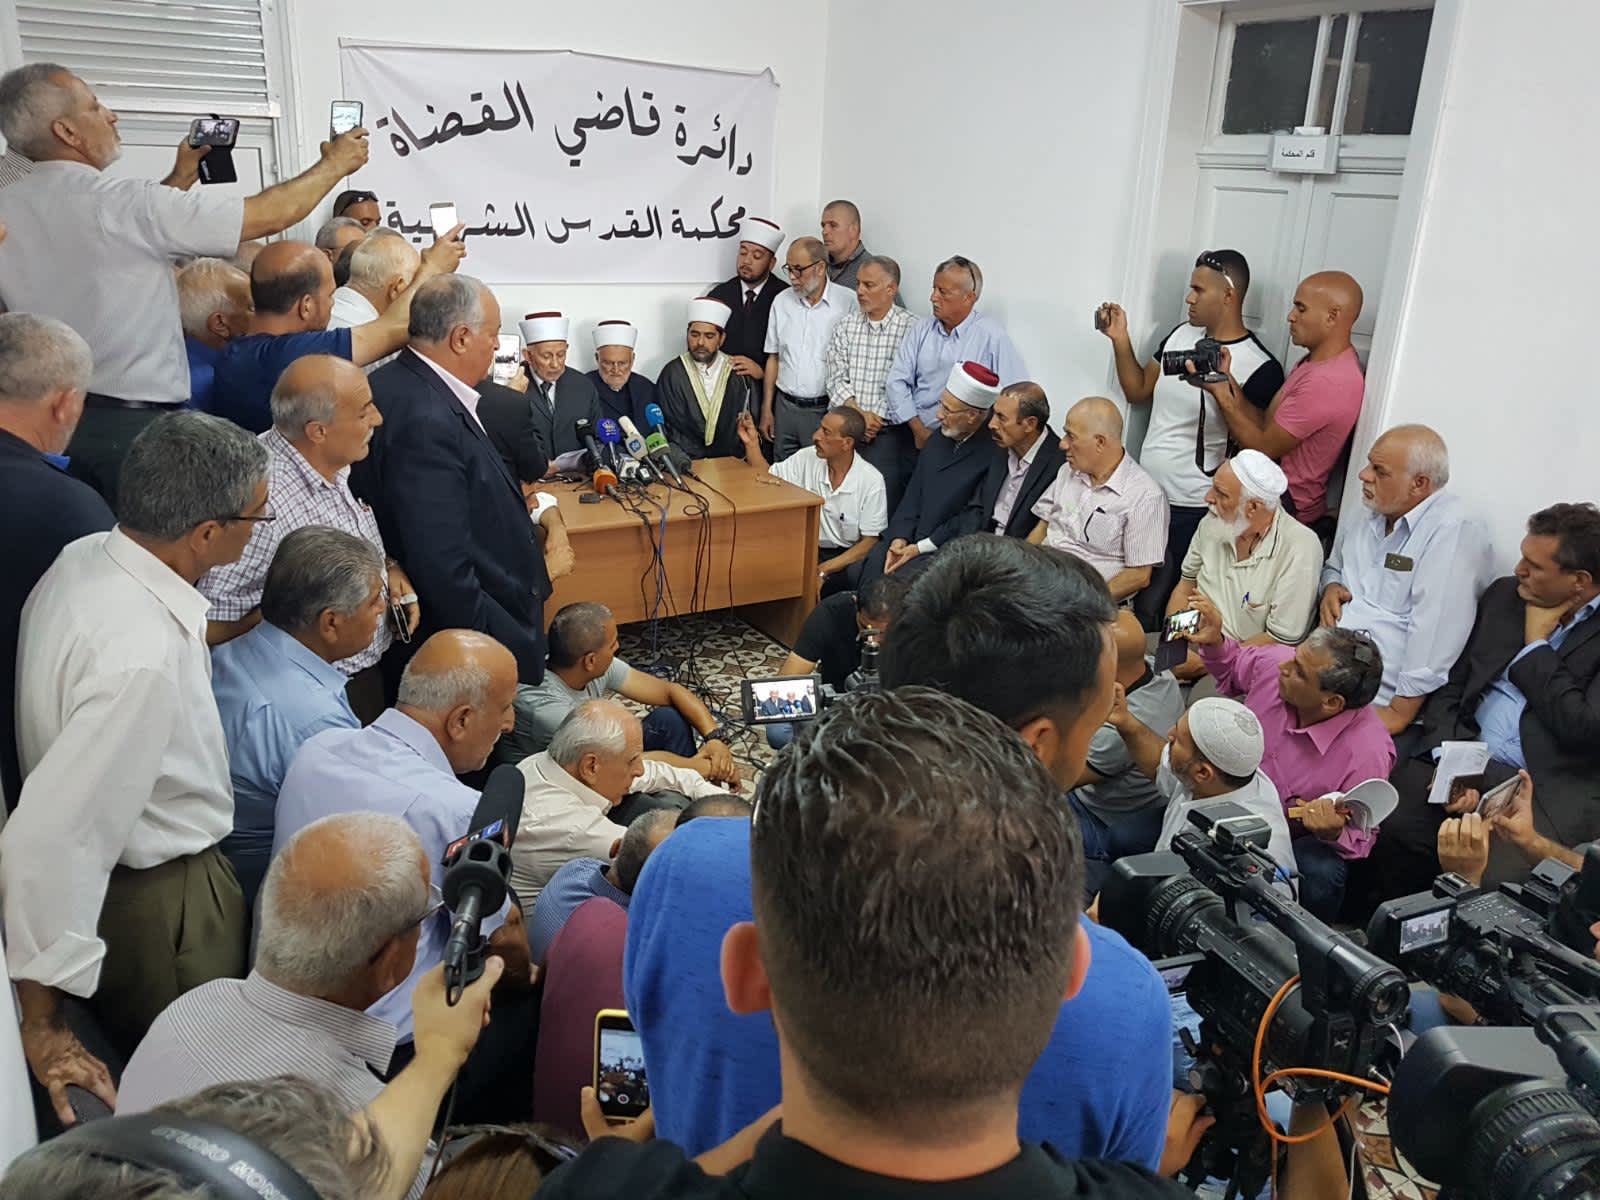 Muslim leaders announce the Muslim return to pray at Temple Mount, July 27, 2017.